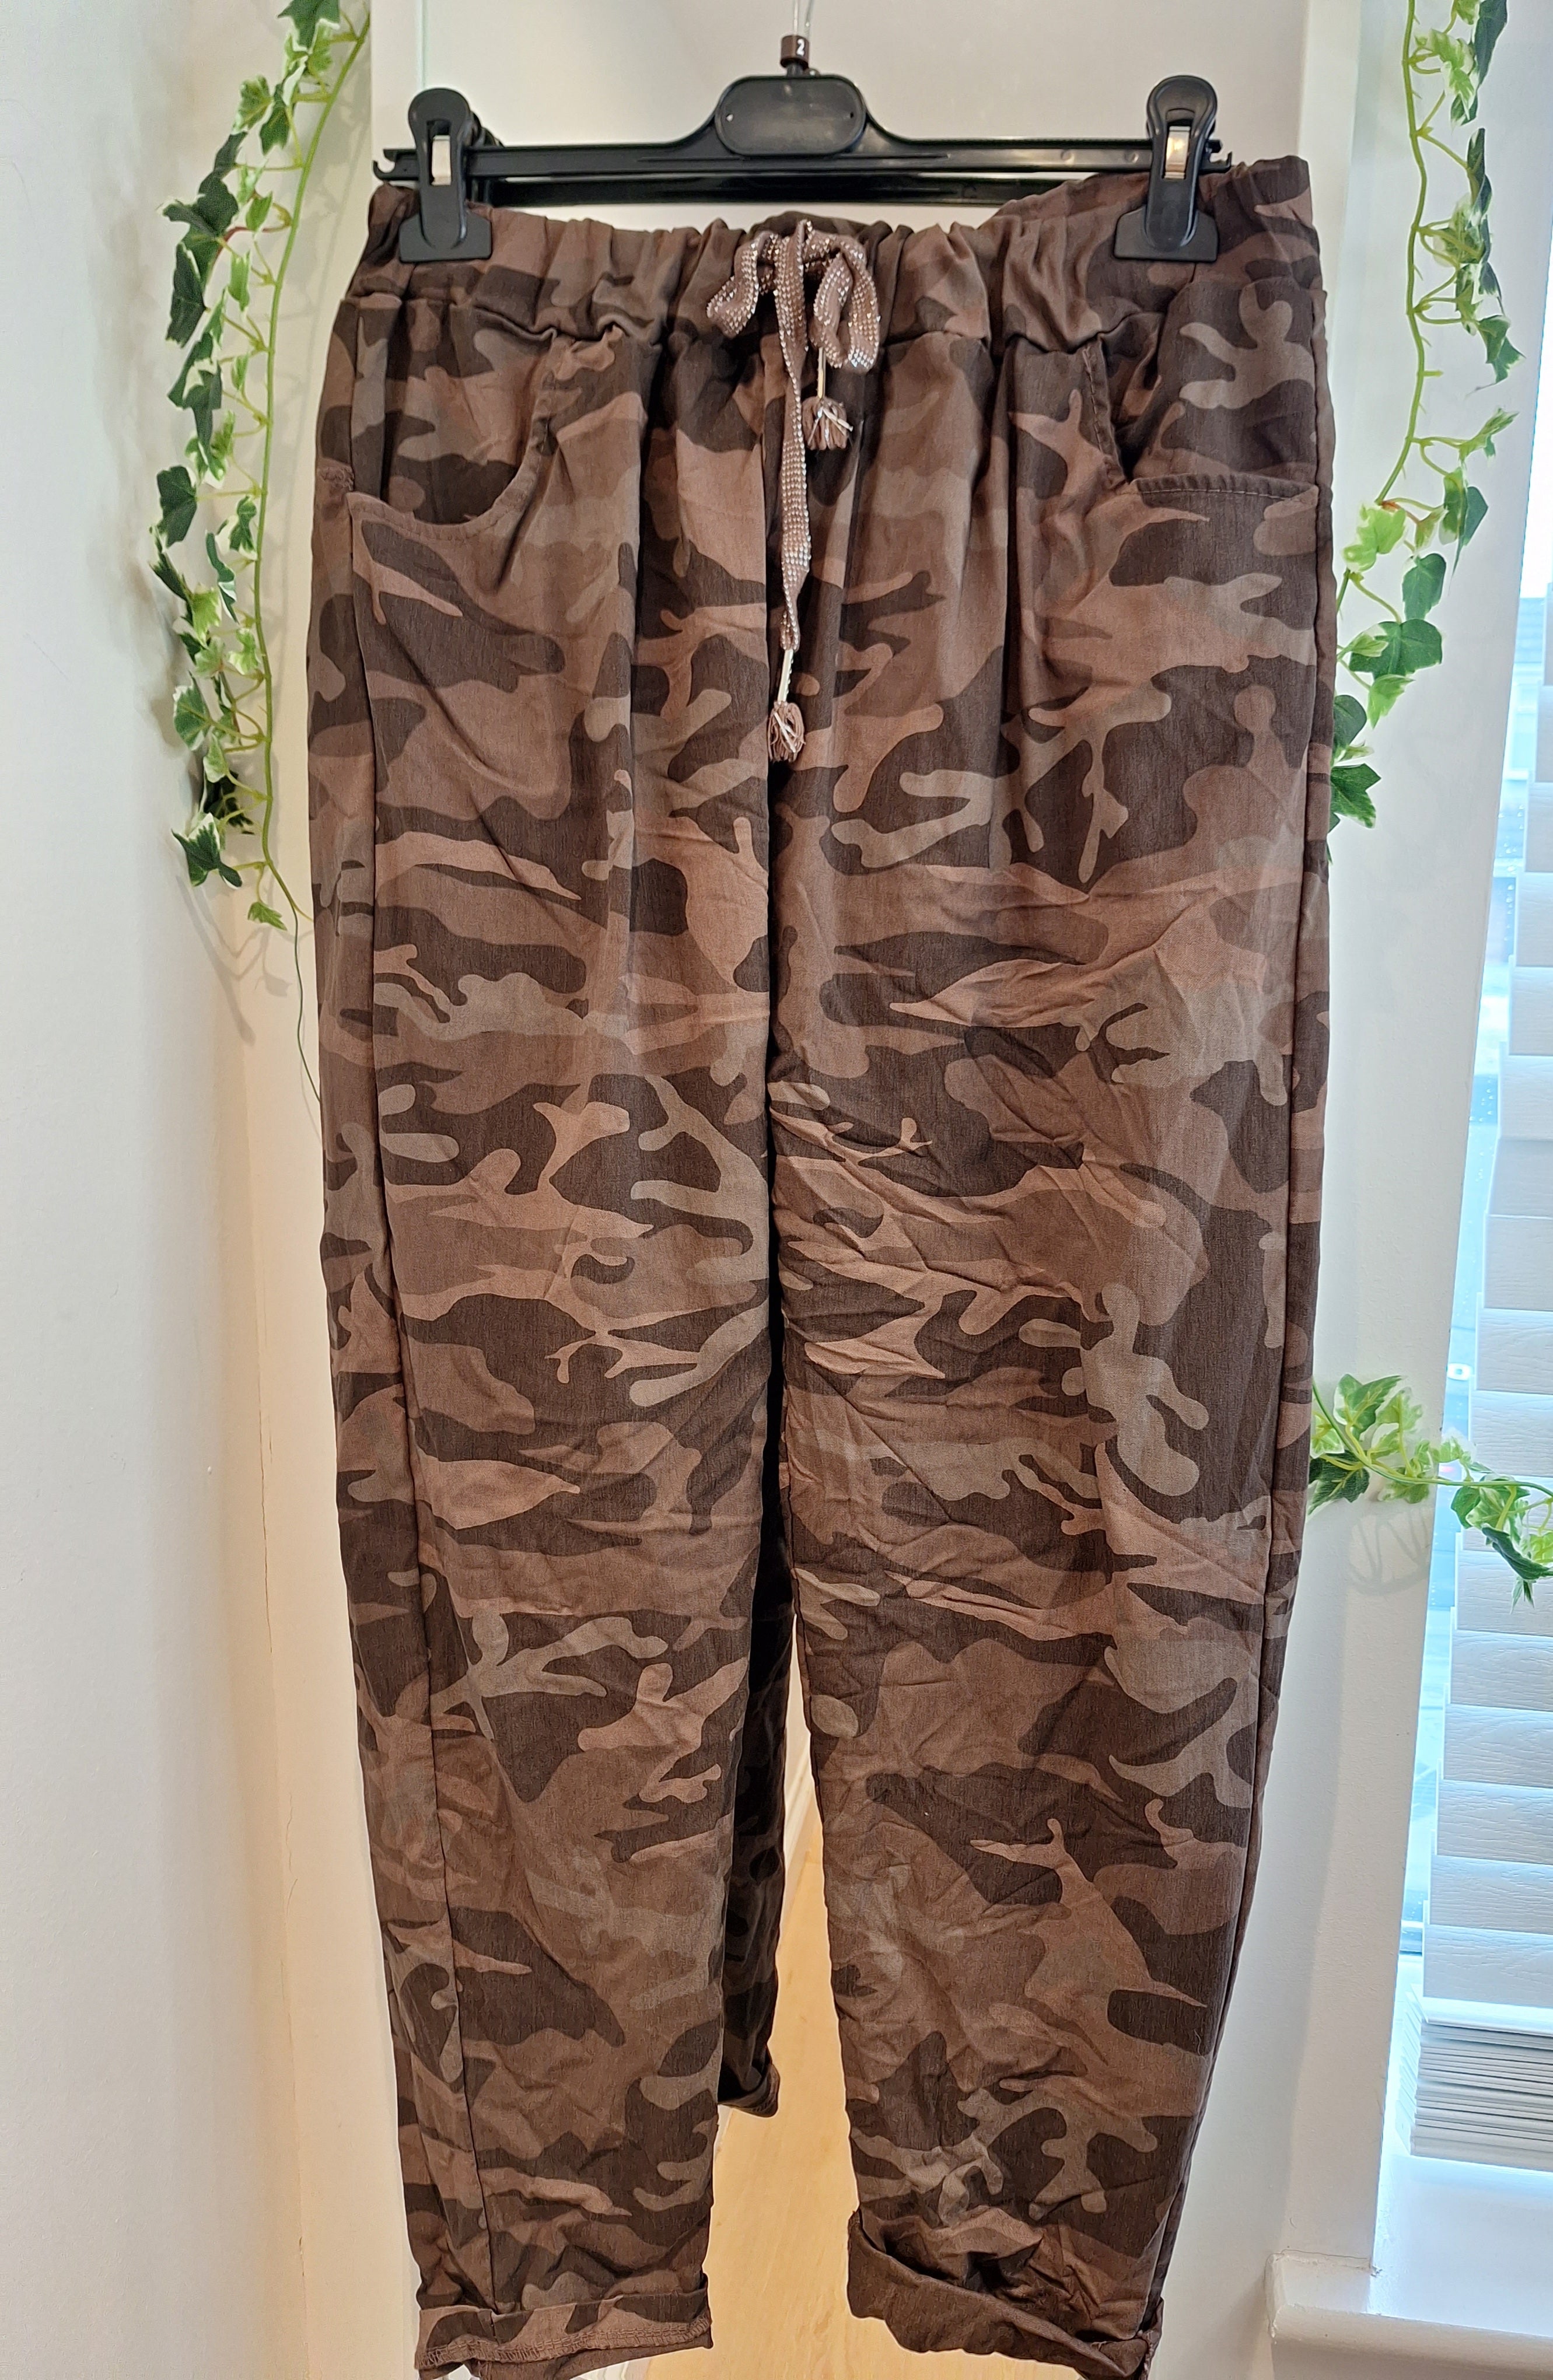 New Camouflage Magics Large and Ruffle Top